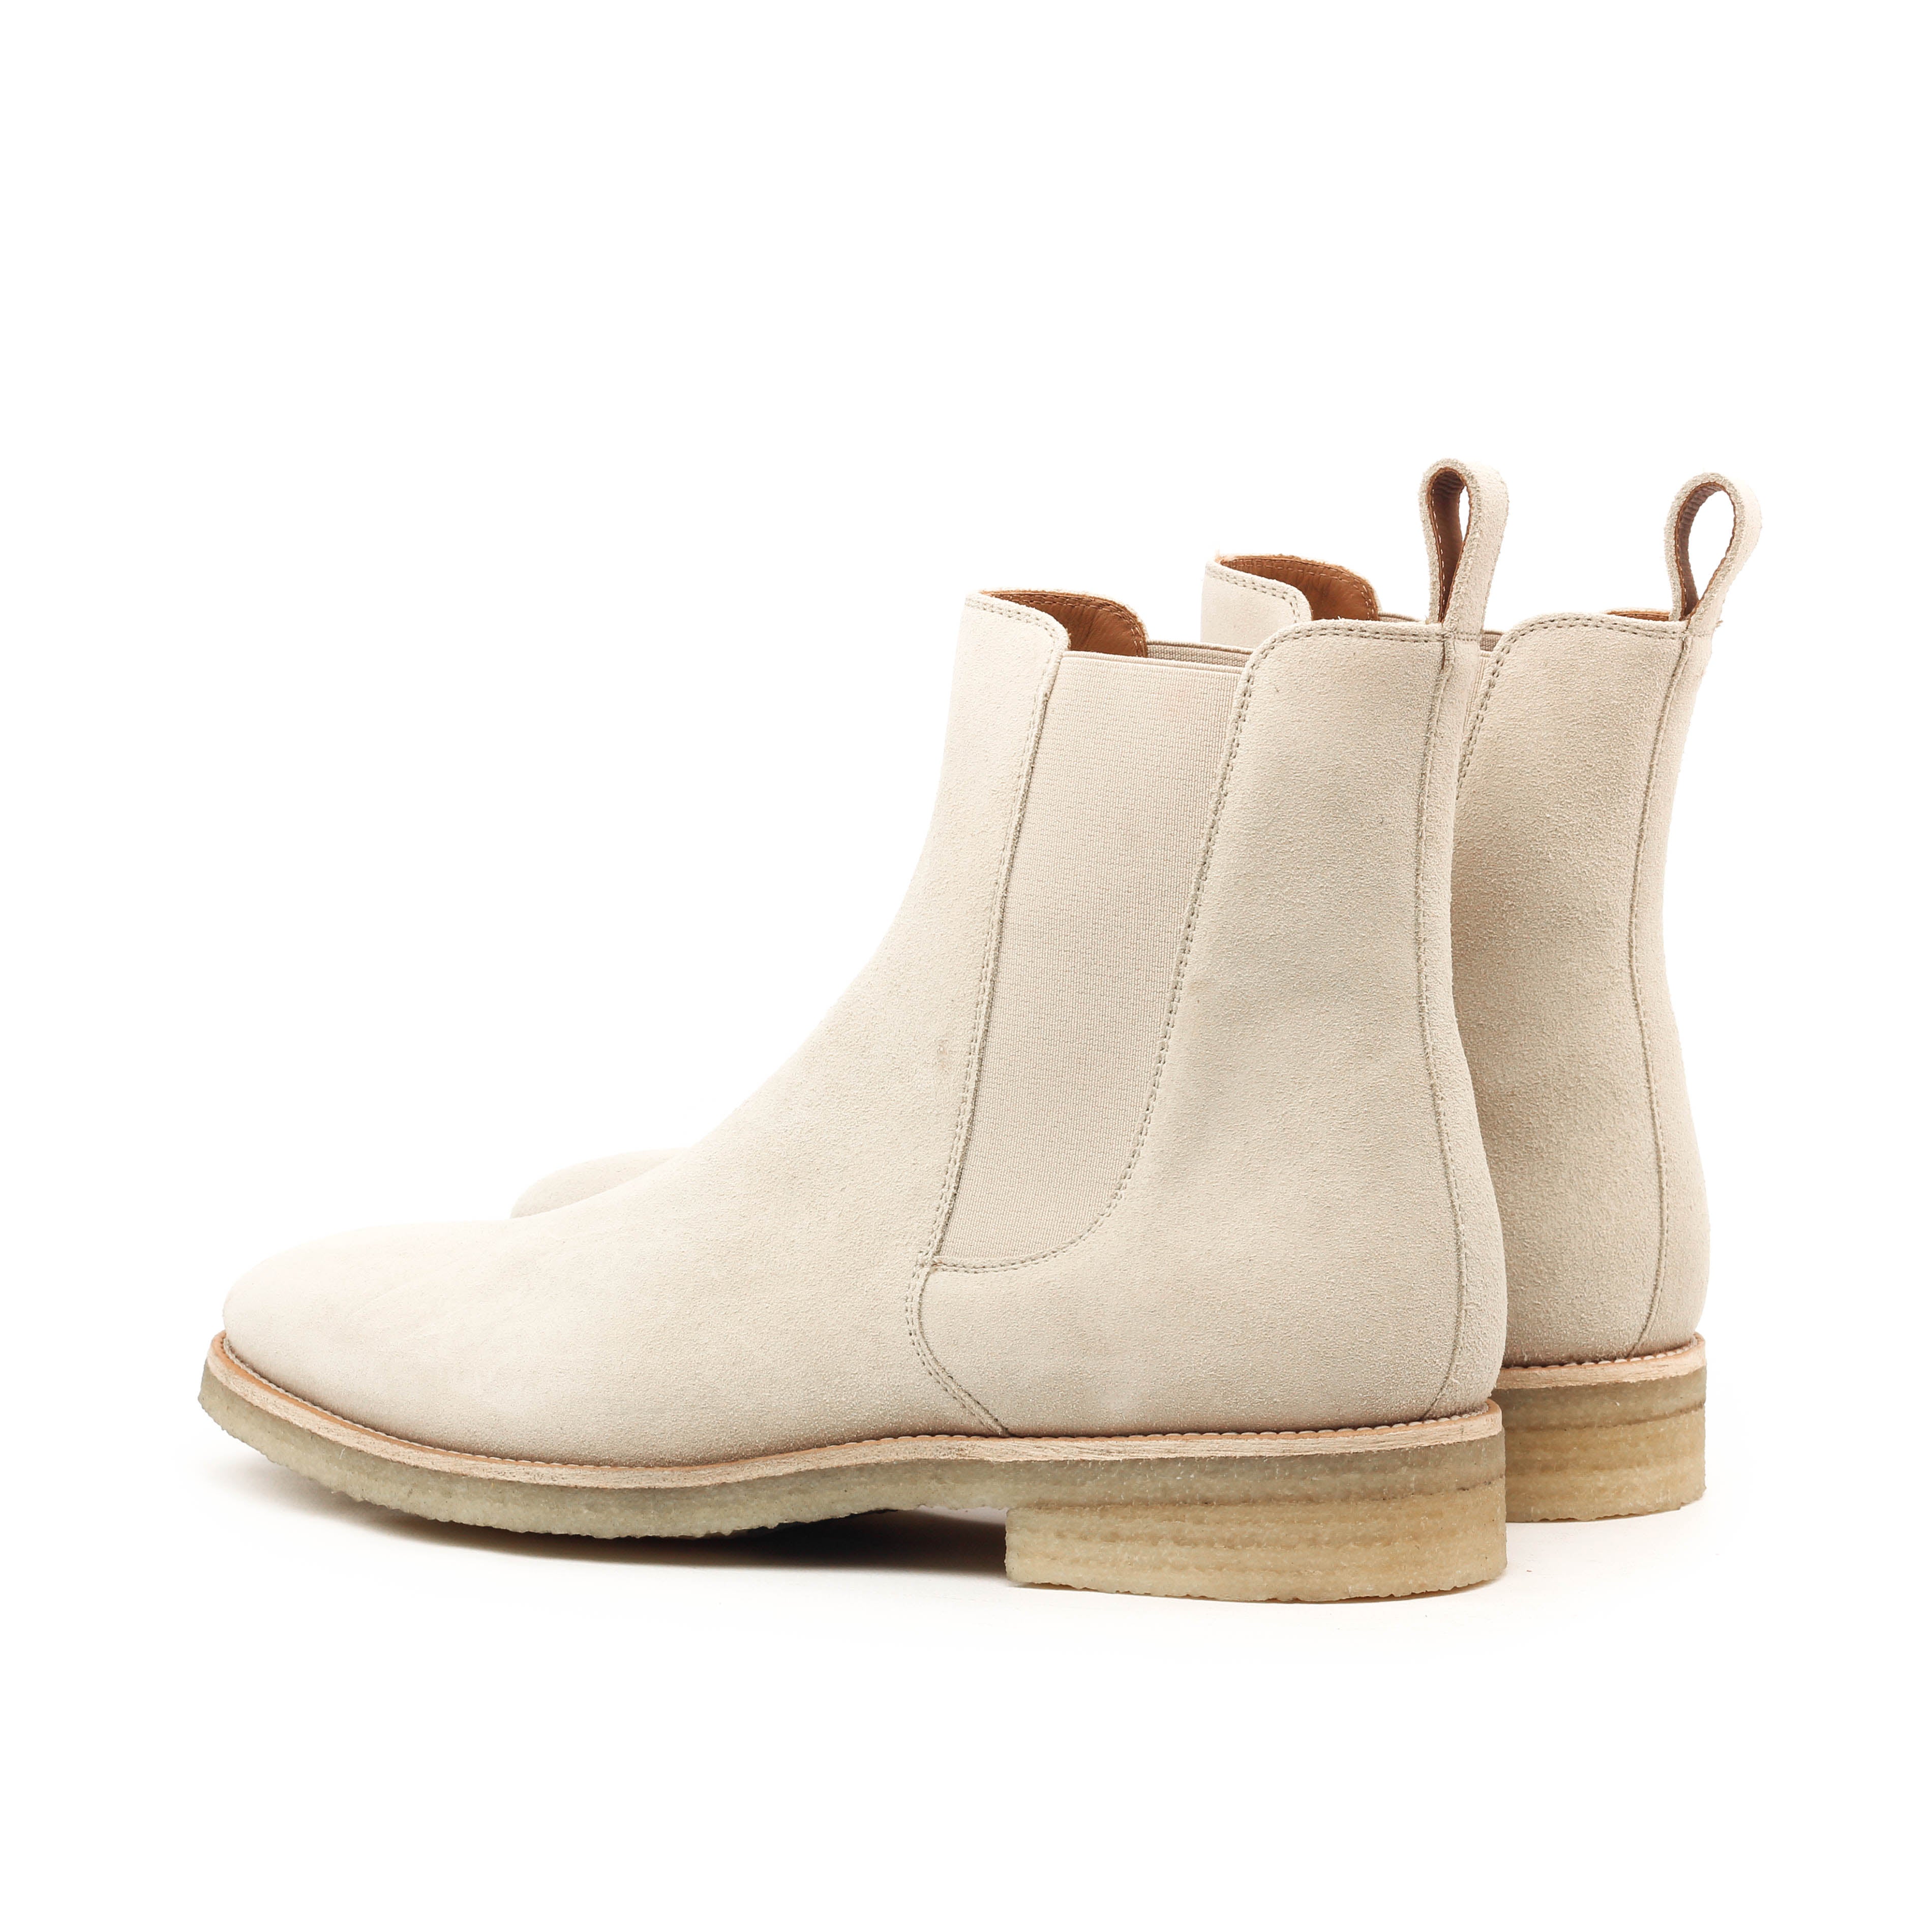 THE SAND CREPE CHELSEA BOOTS | ORO Los Angeles